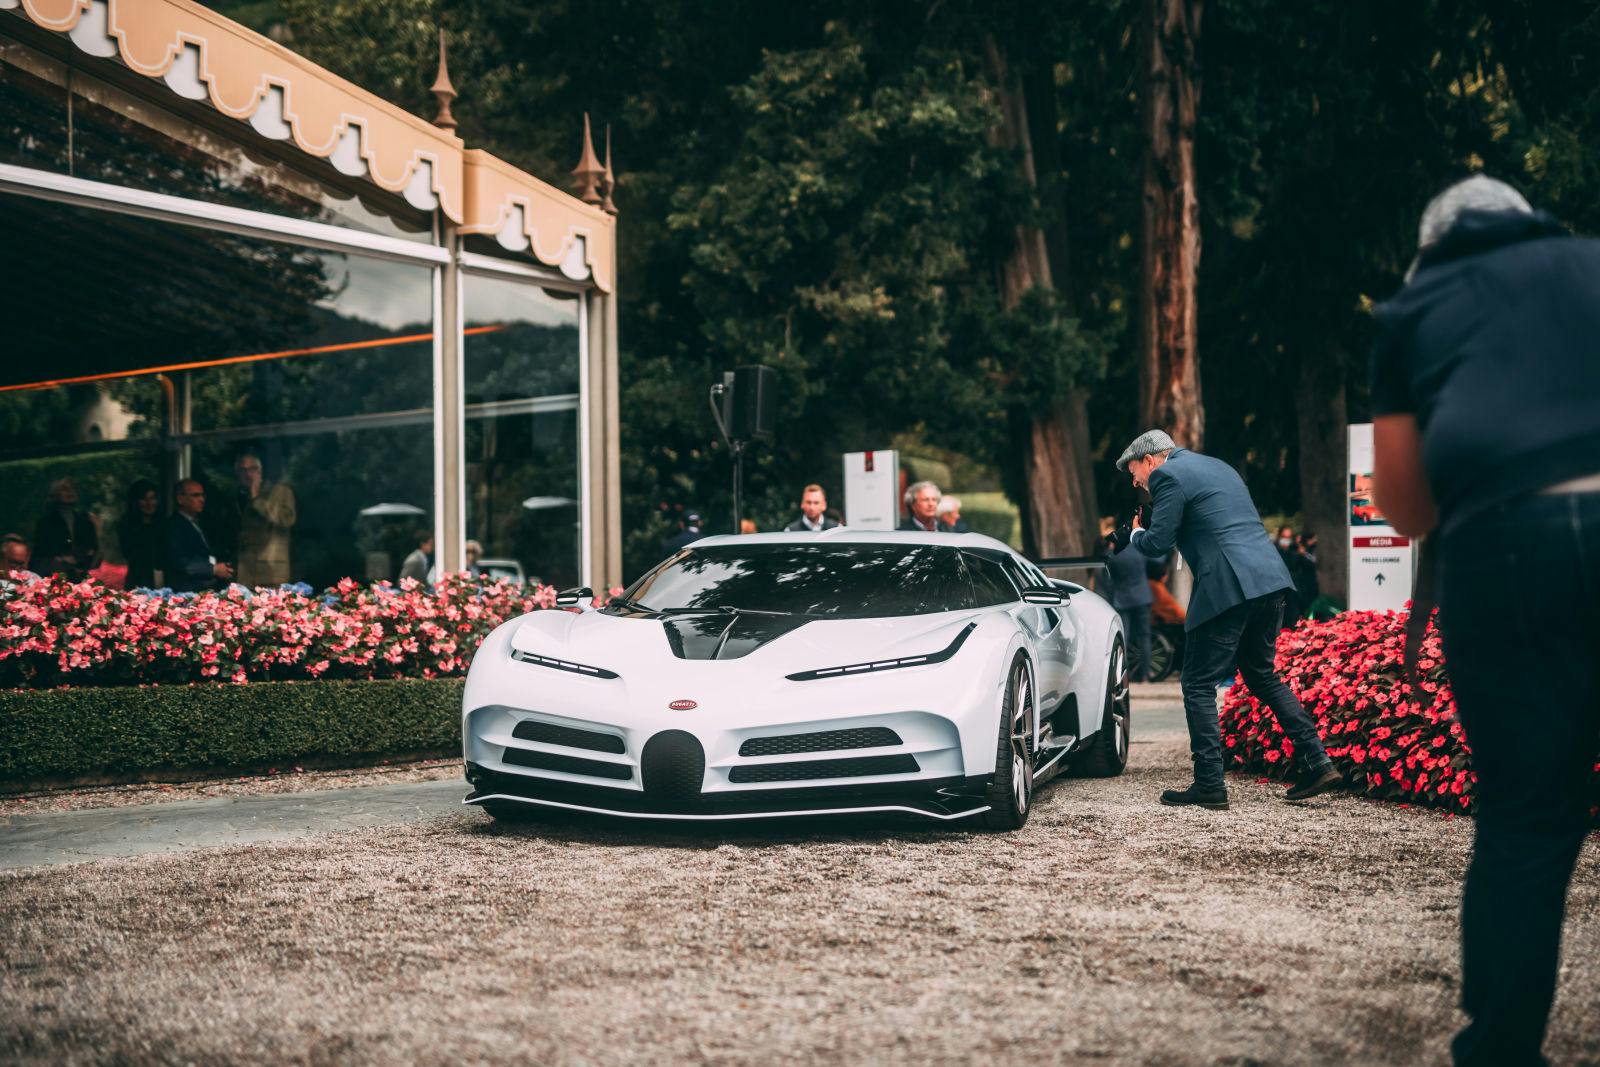 The Centodieci's appearance at the Concorso d'Eleganza at Villa d'Este was one of the highlights of this year's automotive season.